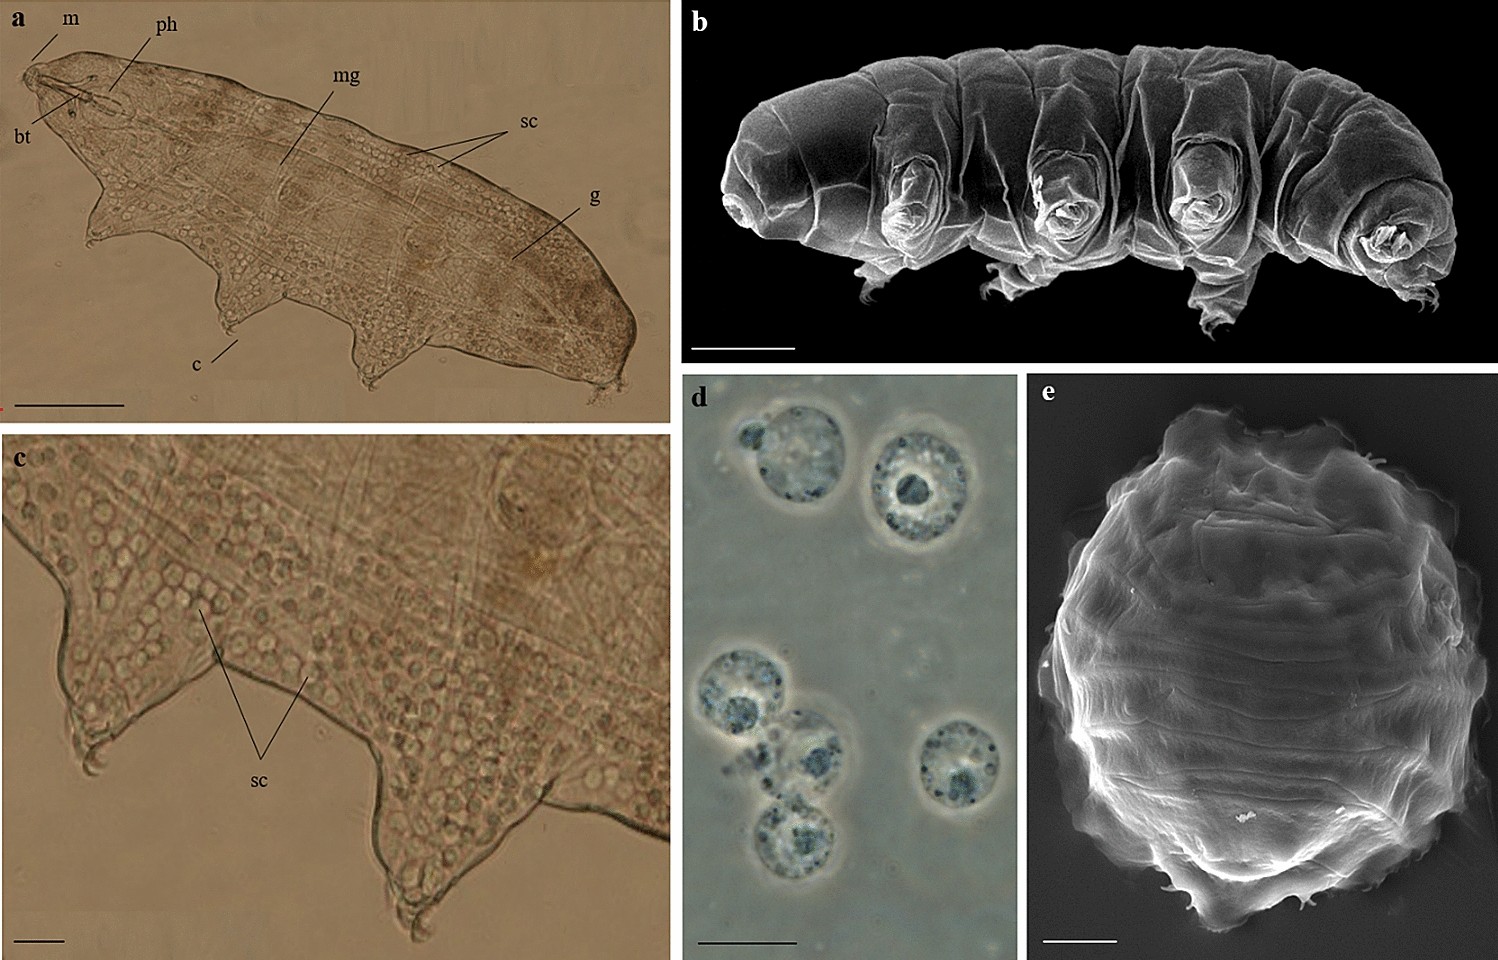 Production of reactive oxygen species and involvement of bioprotectants  during anhydrobiosis in the tardigrade Paramacrobiotus spatialis |  Scientific Reports